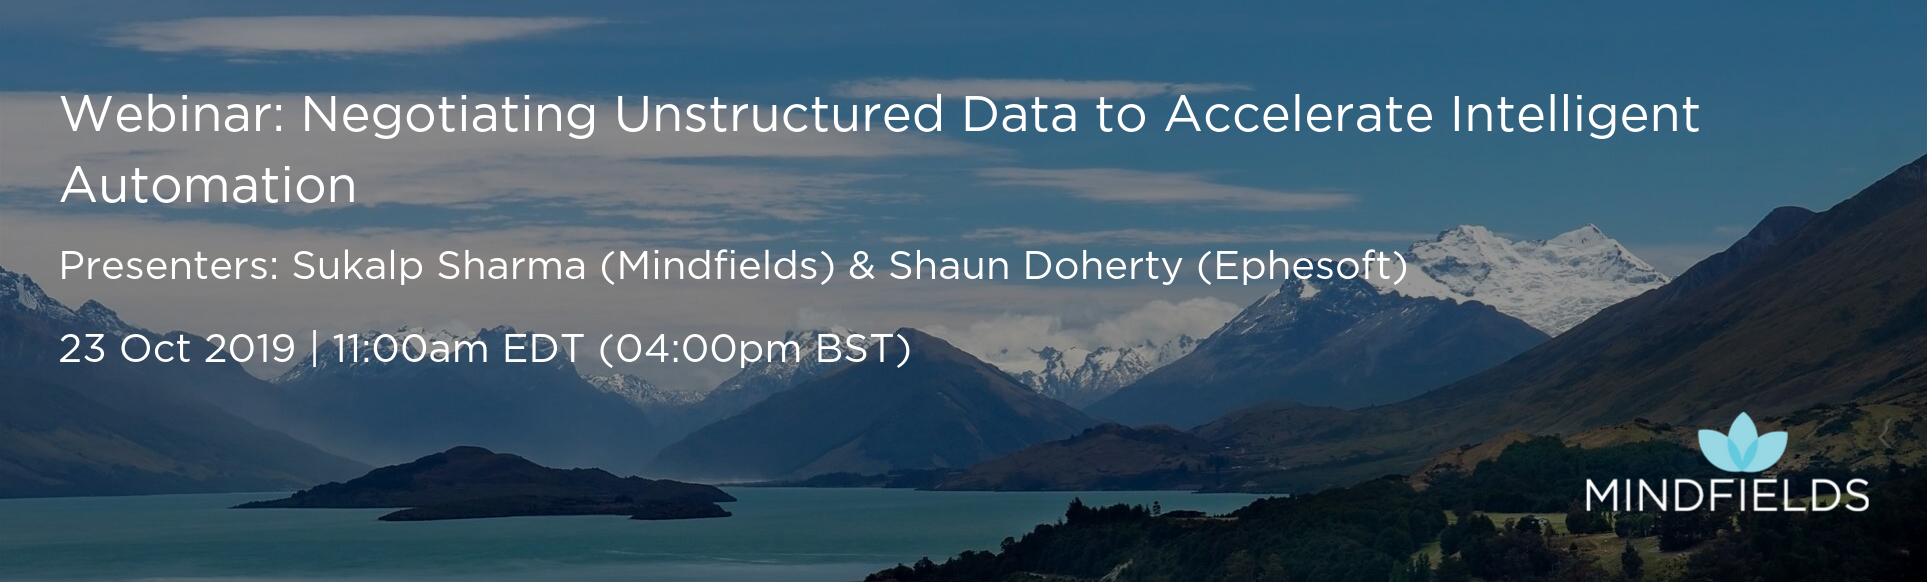 Extracting Unstructured Data Using IA